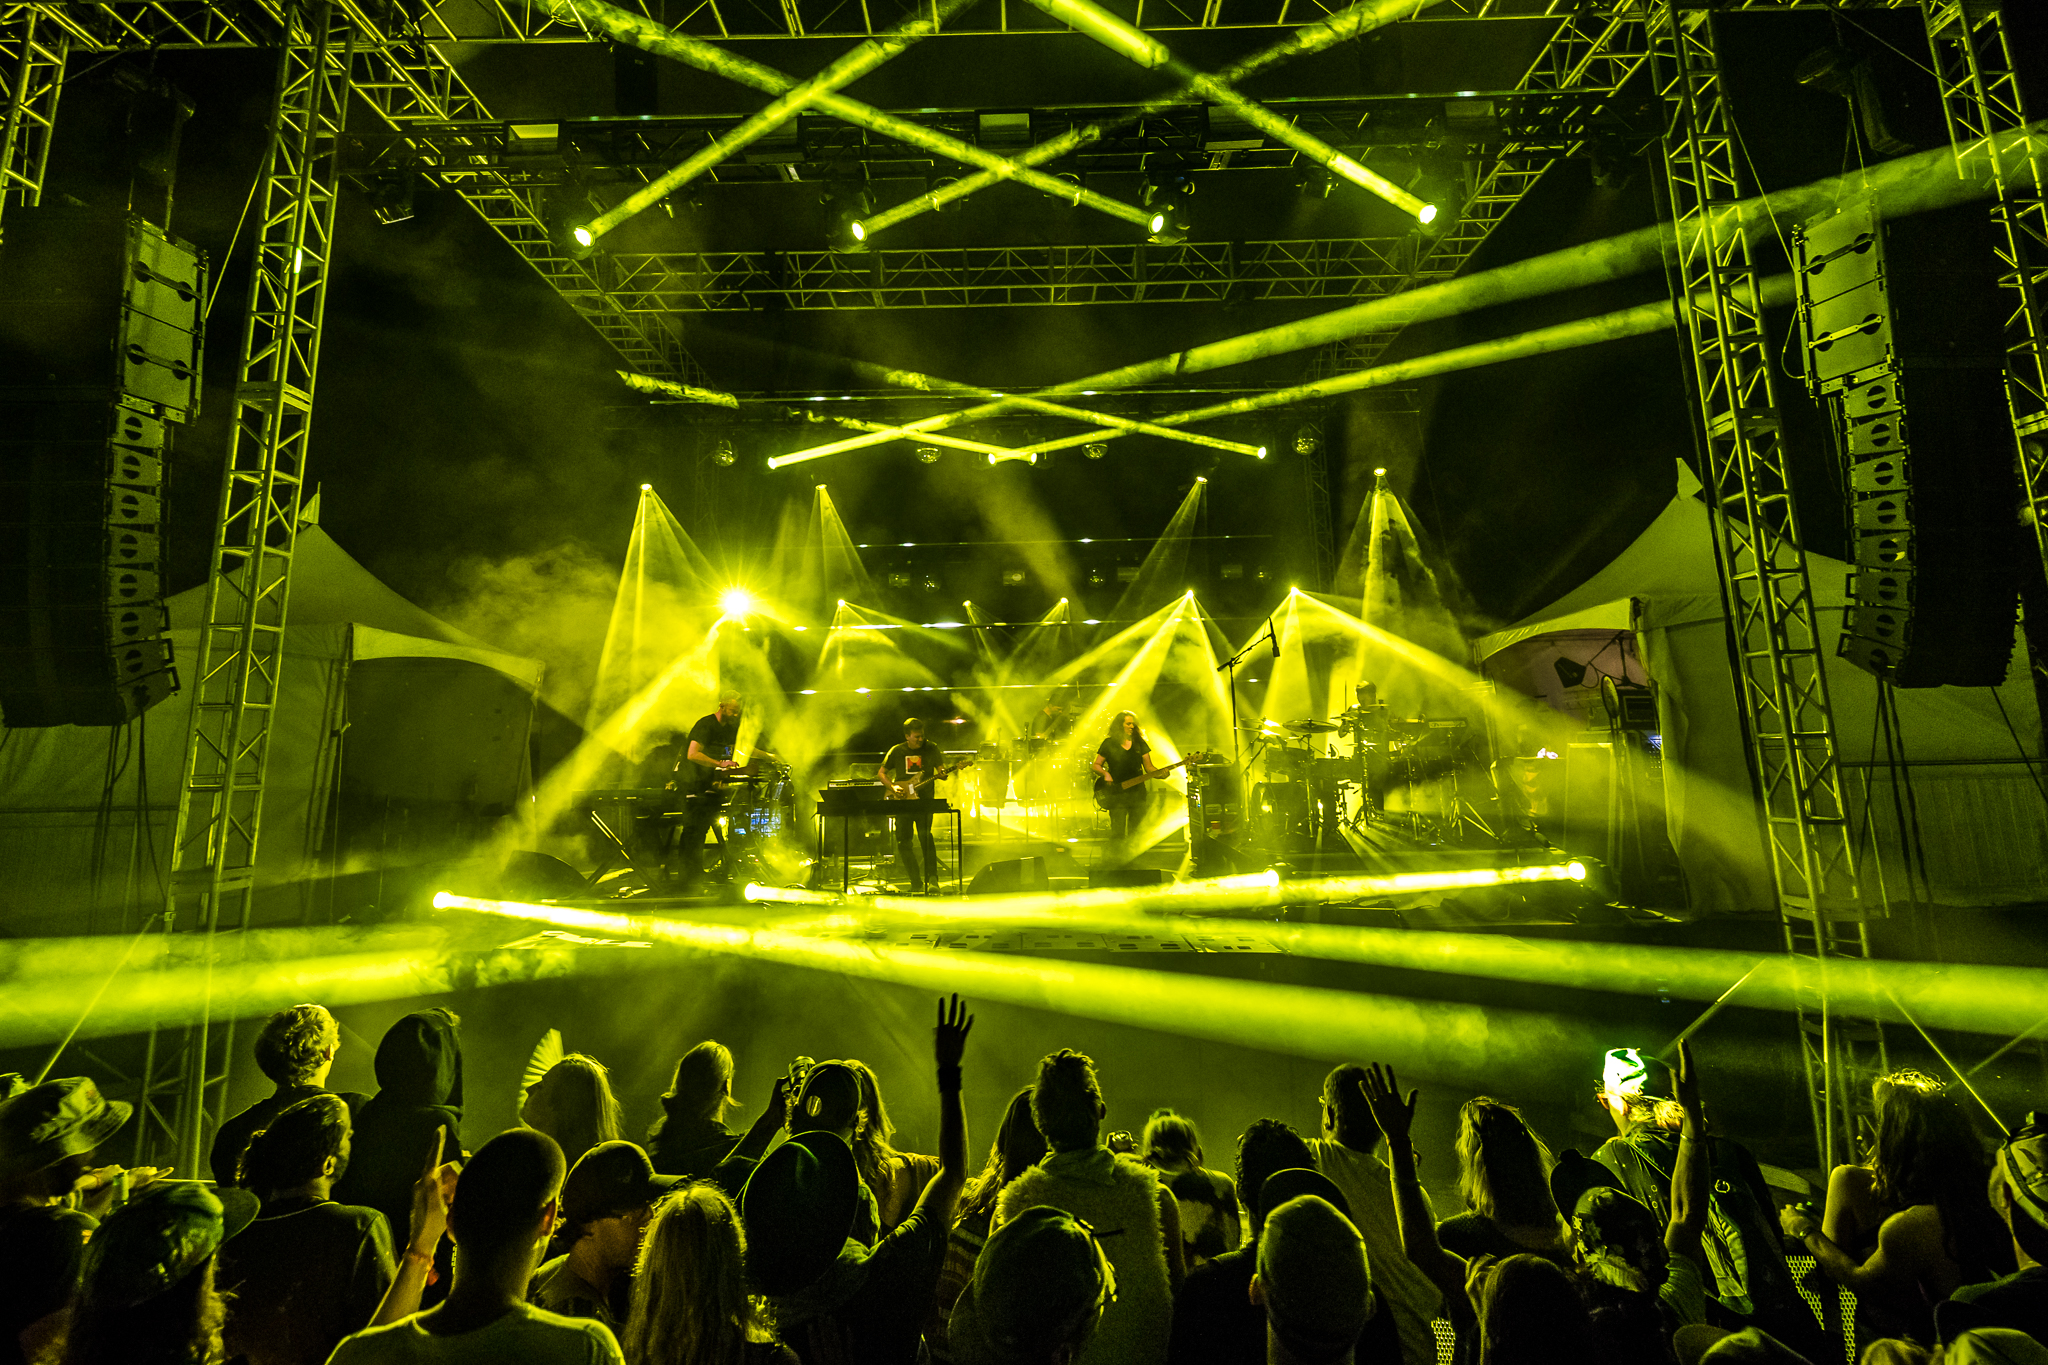 STS9 Announces Lineup for Wave Spell Live | EDM Maniac